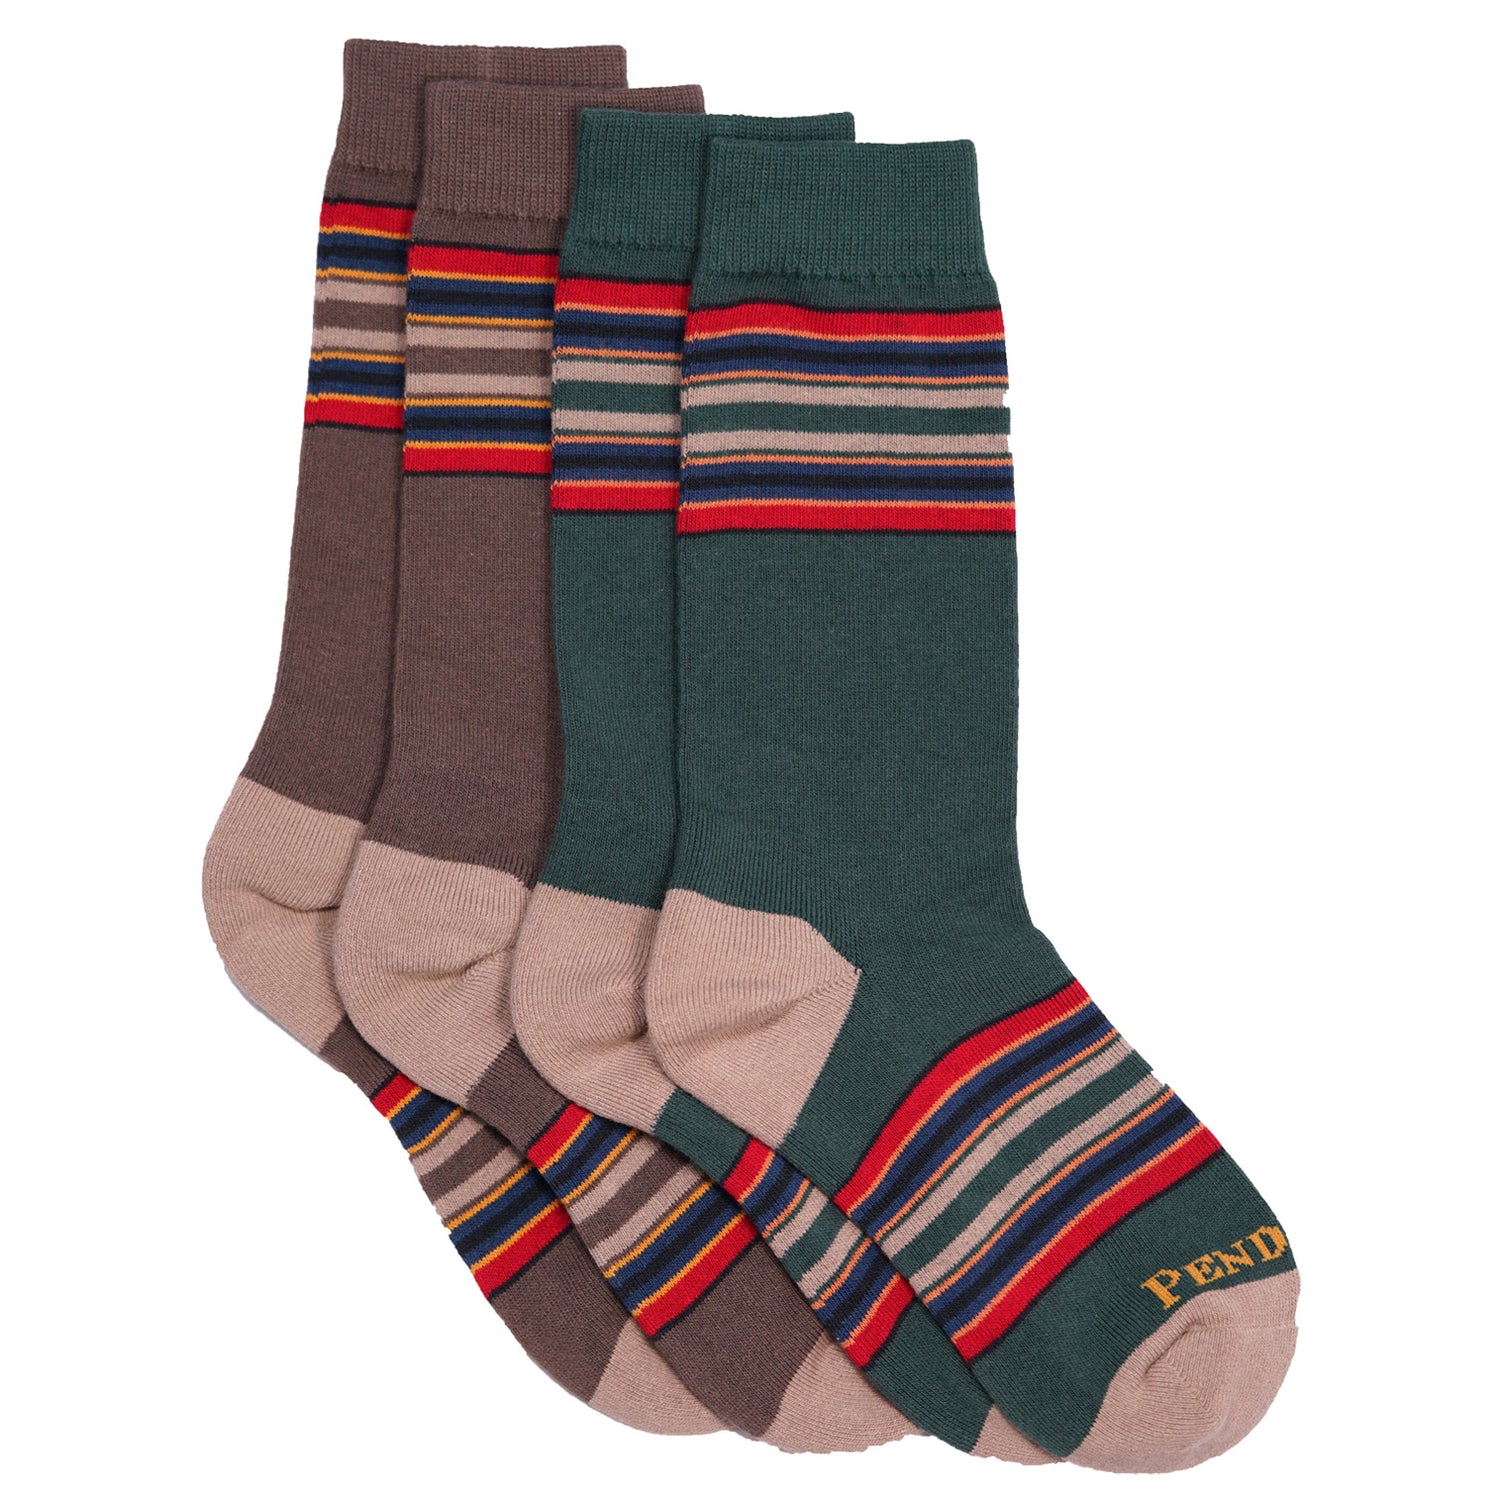 Yakima Sock Two Pack - Mineral Umber / Green Heather